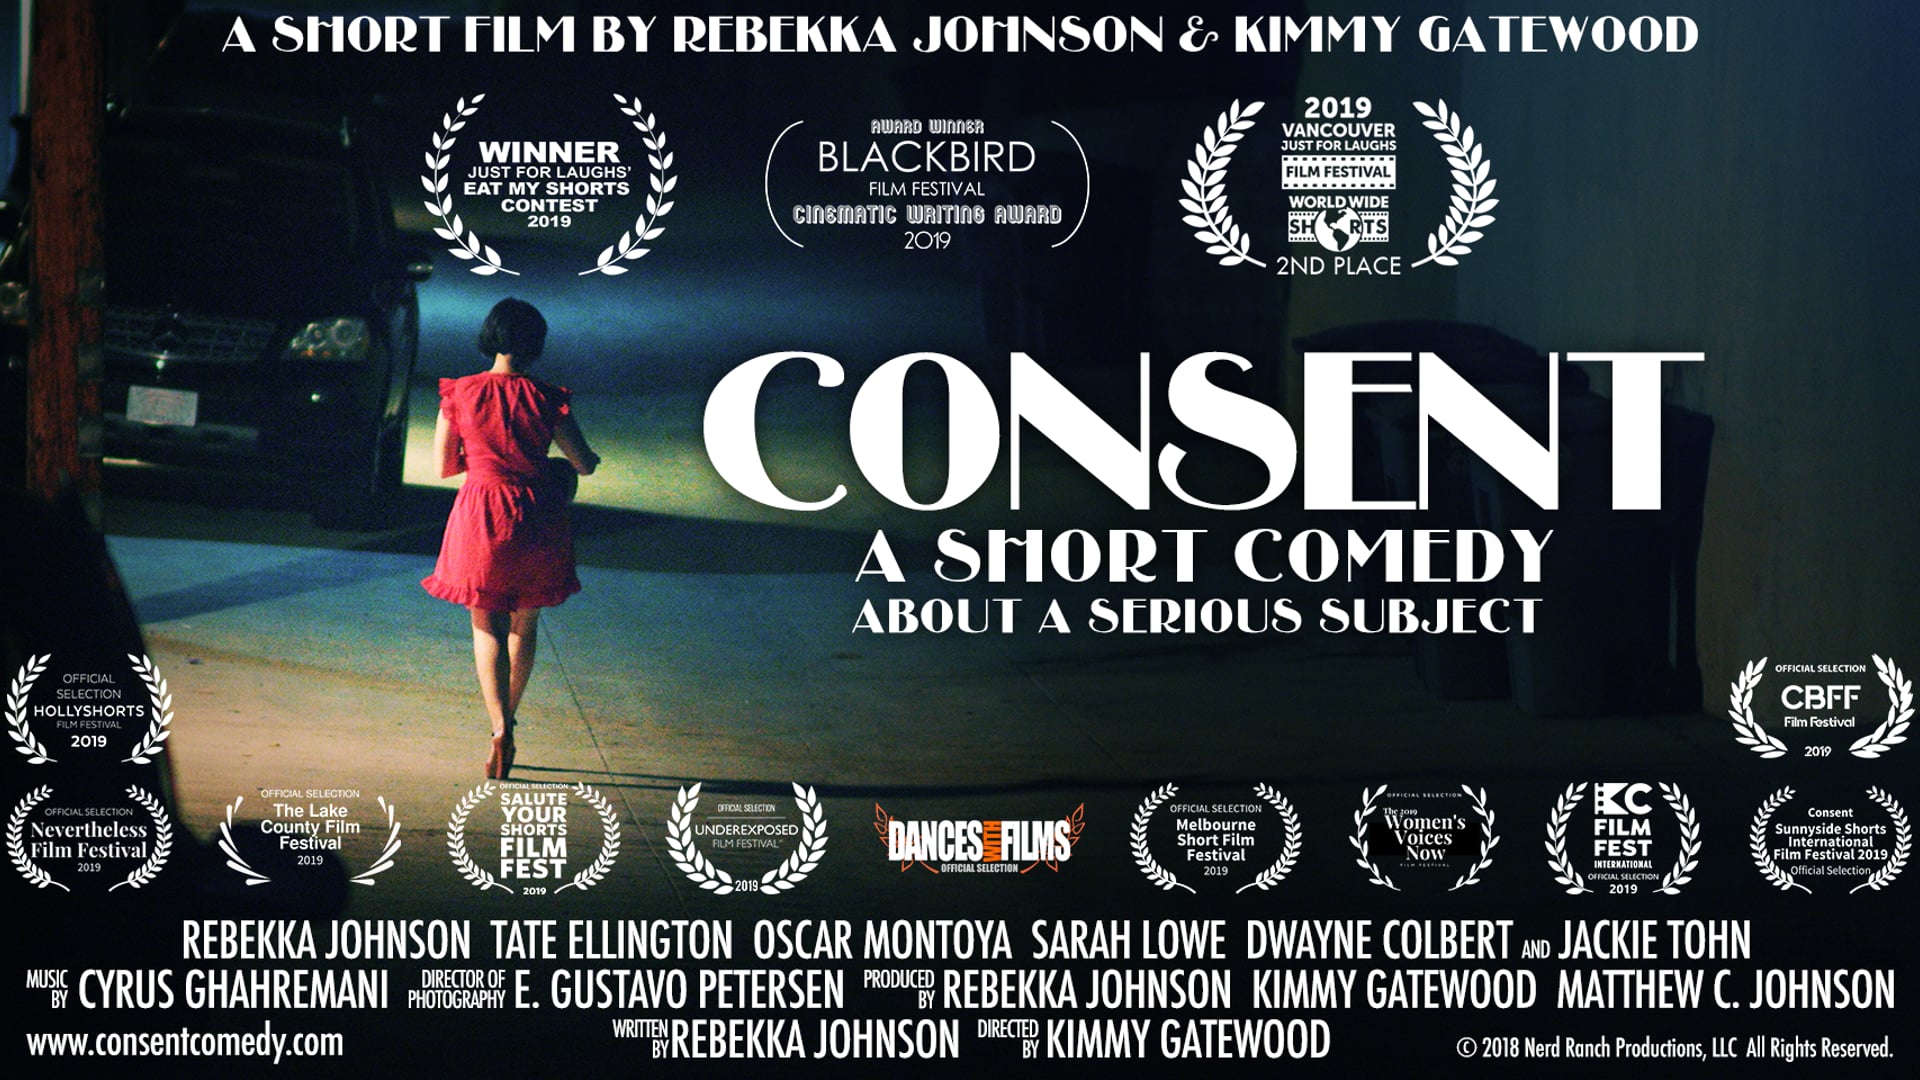 CONSENT: A Short Comedy About a Serious Subject